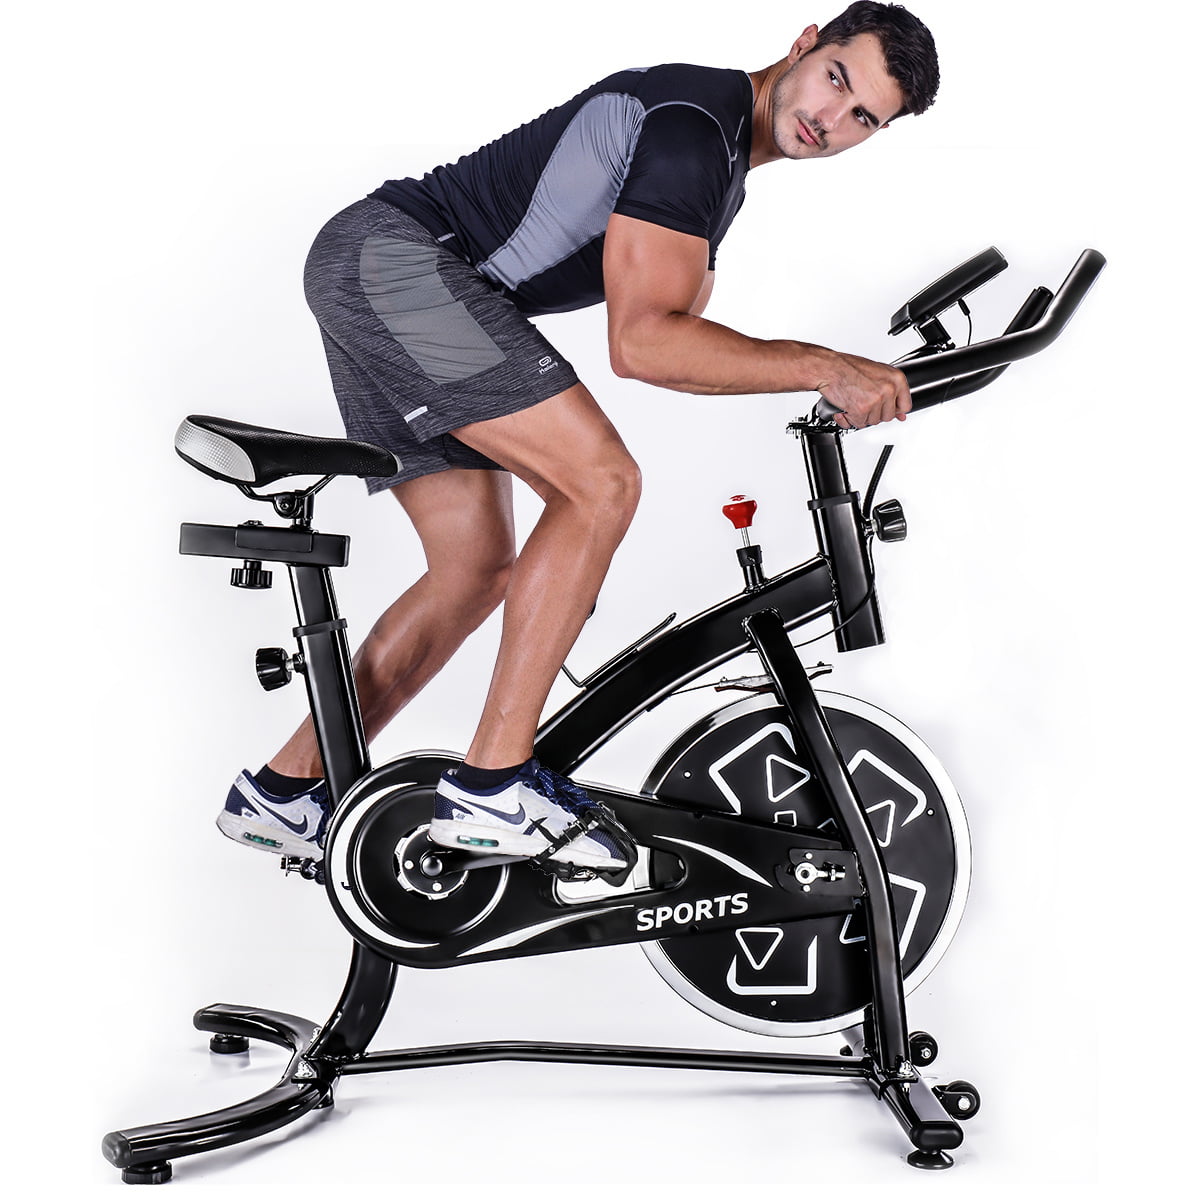 Details about   Stationary Indoor Cycling Bike Cardio Workout Belt Drive Exercise Bicycle. 